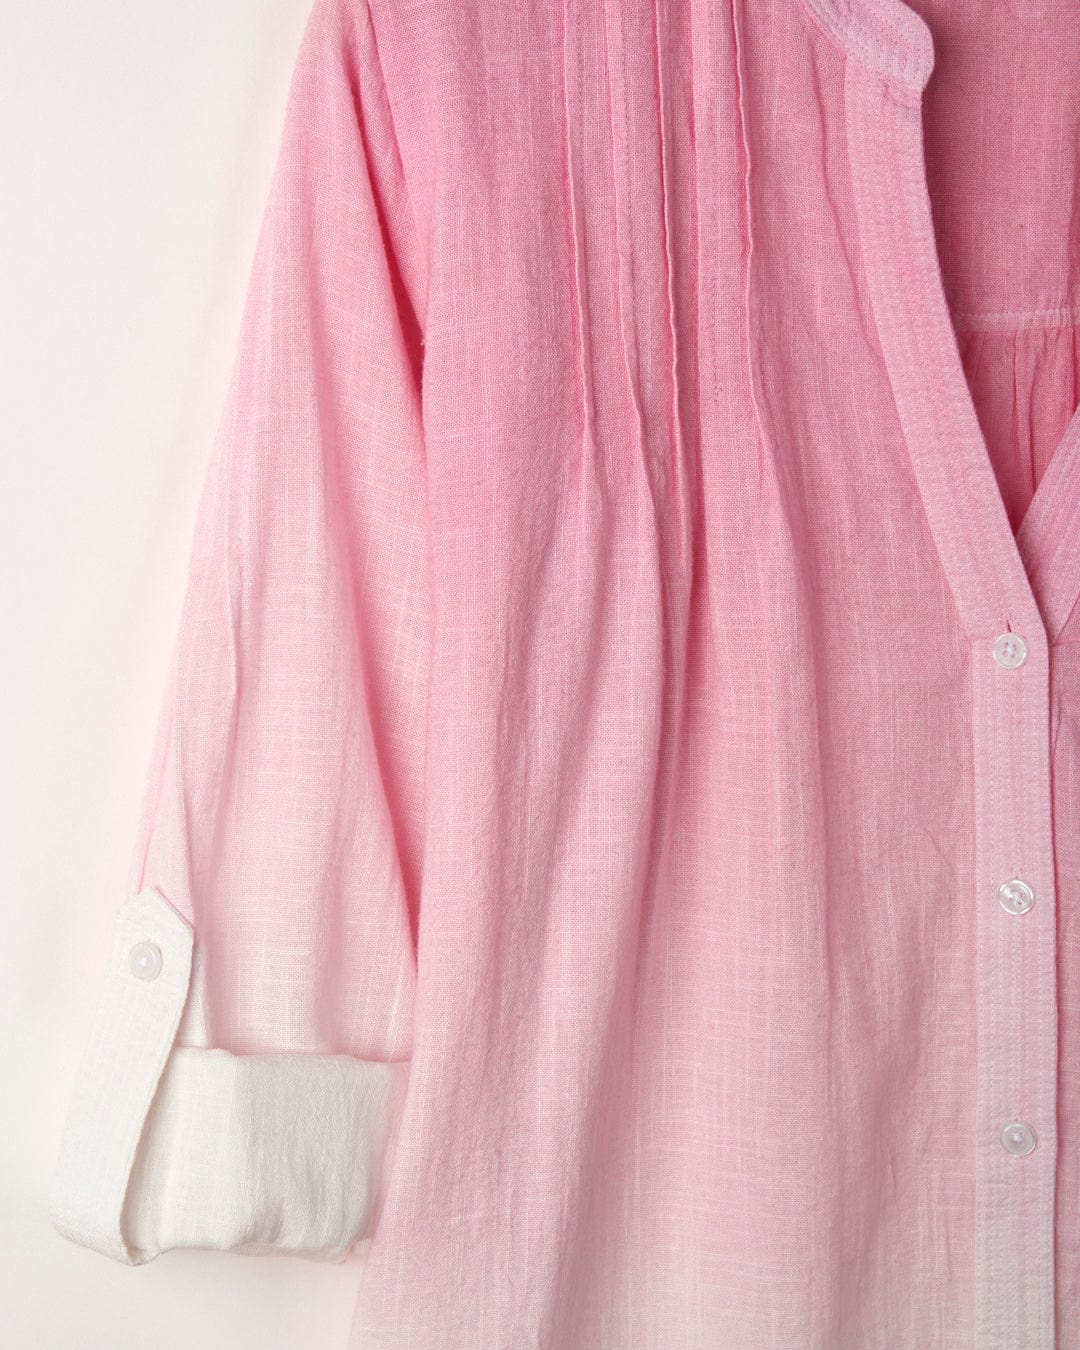 A Saltrock Karthi - Womens Long Sleeve Shirt - Pink/White, featuring a wrinkled, long-sleeve pink dip dye design with a white collar and cuffs, button-front closure, and light pleating detail. The fabric has a soft, faded appearance, transitioning from pink to white at the cuffs.